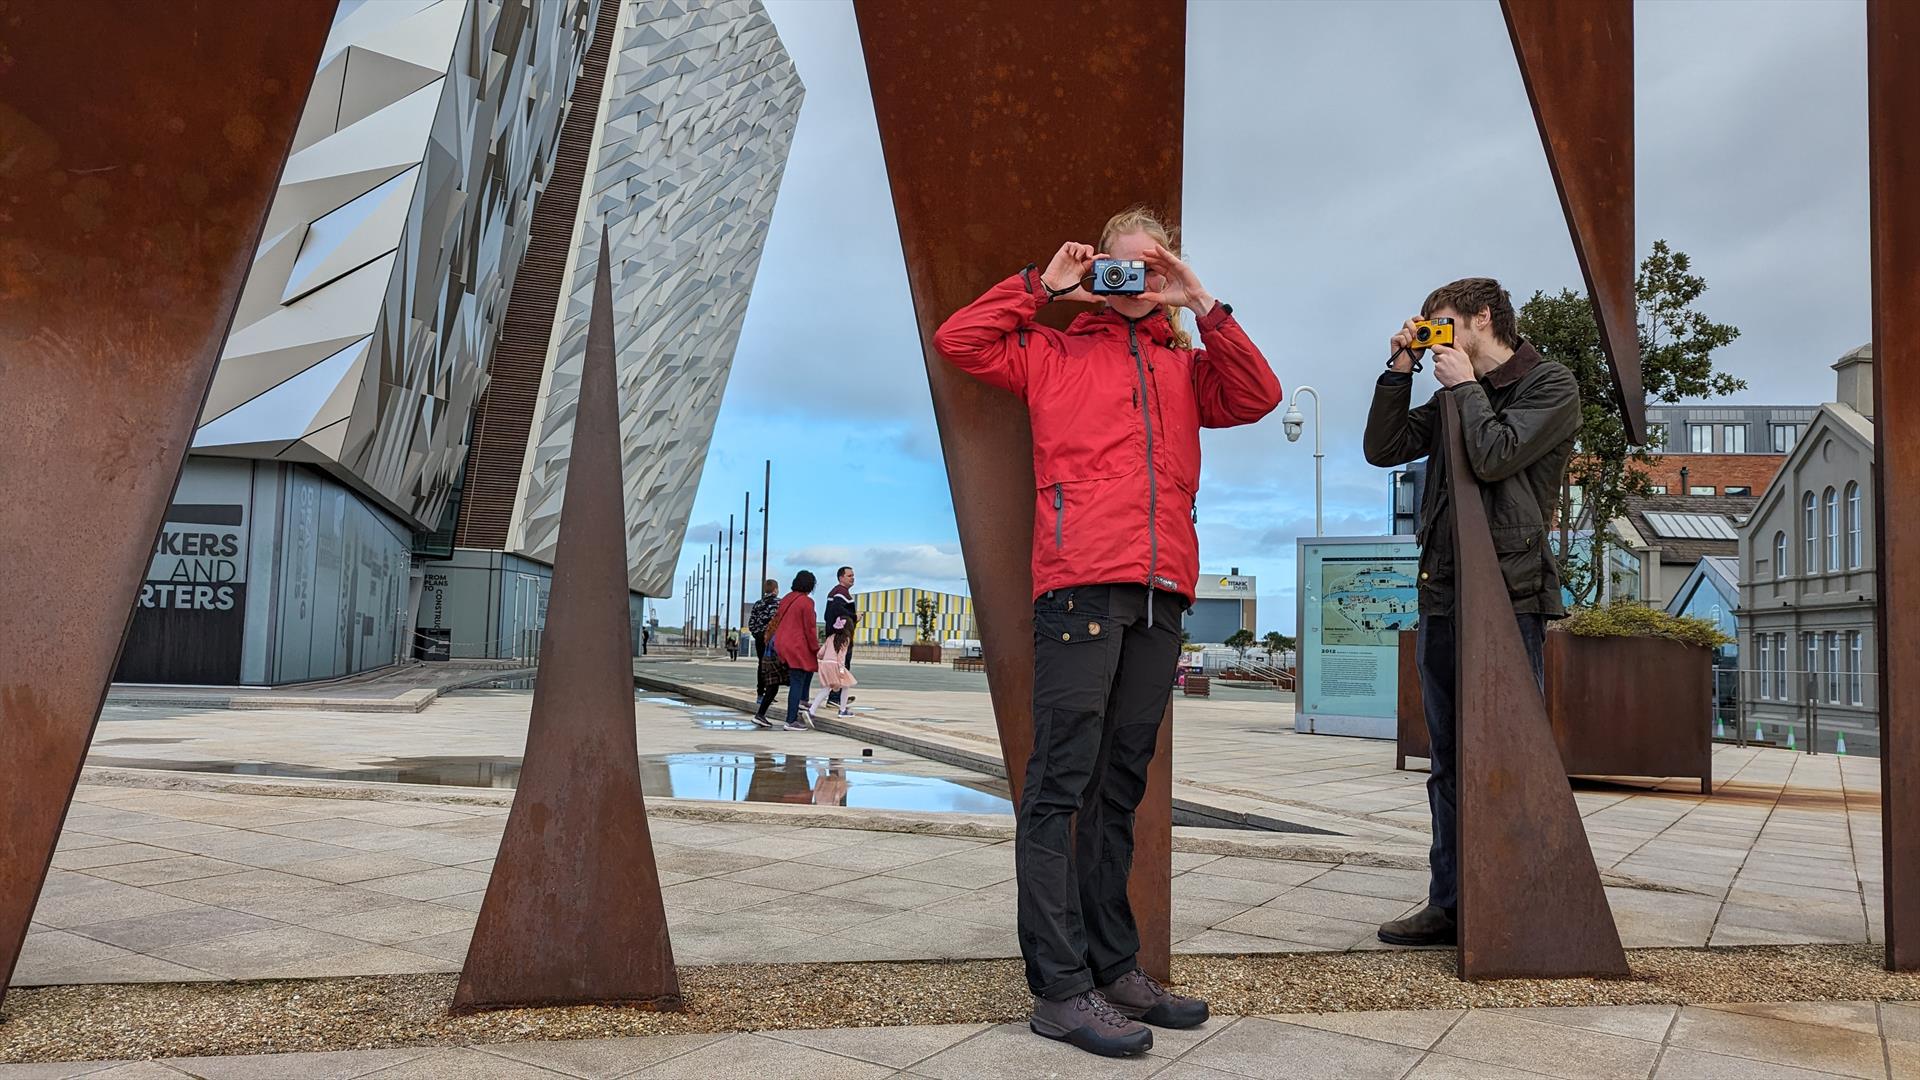 Two visitors taking pictures with Konica Pop cameras at the Titanic sign.